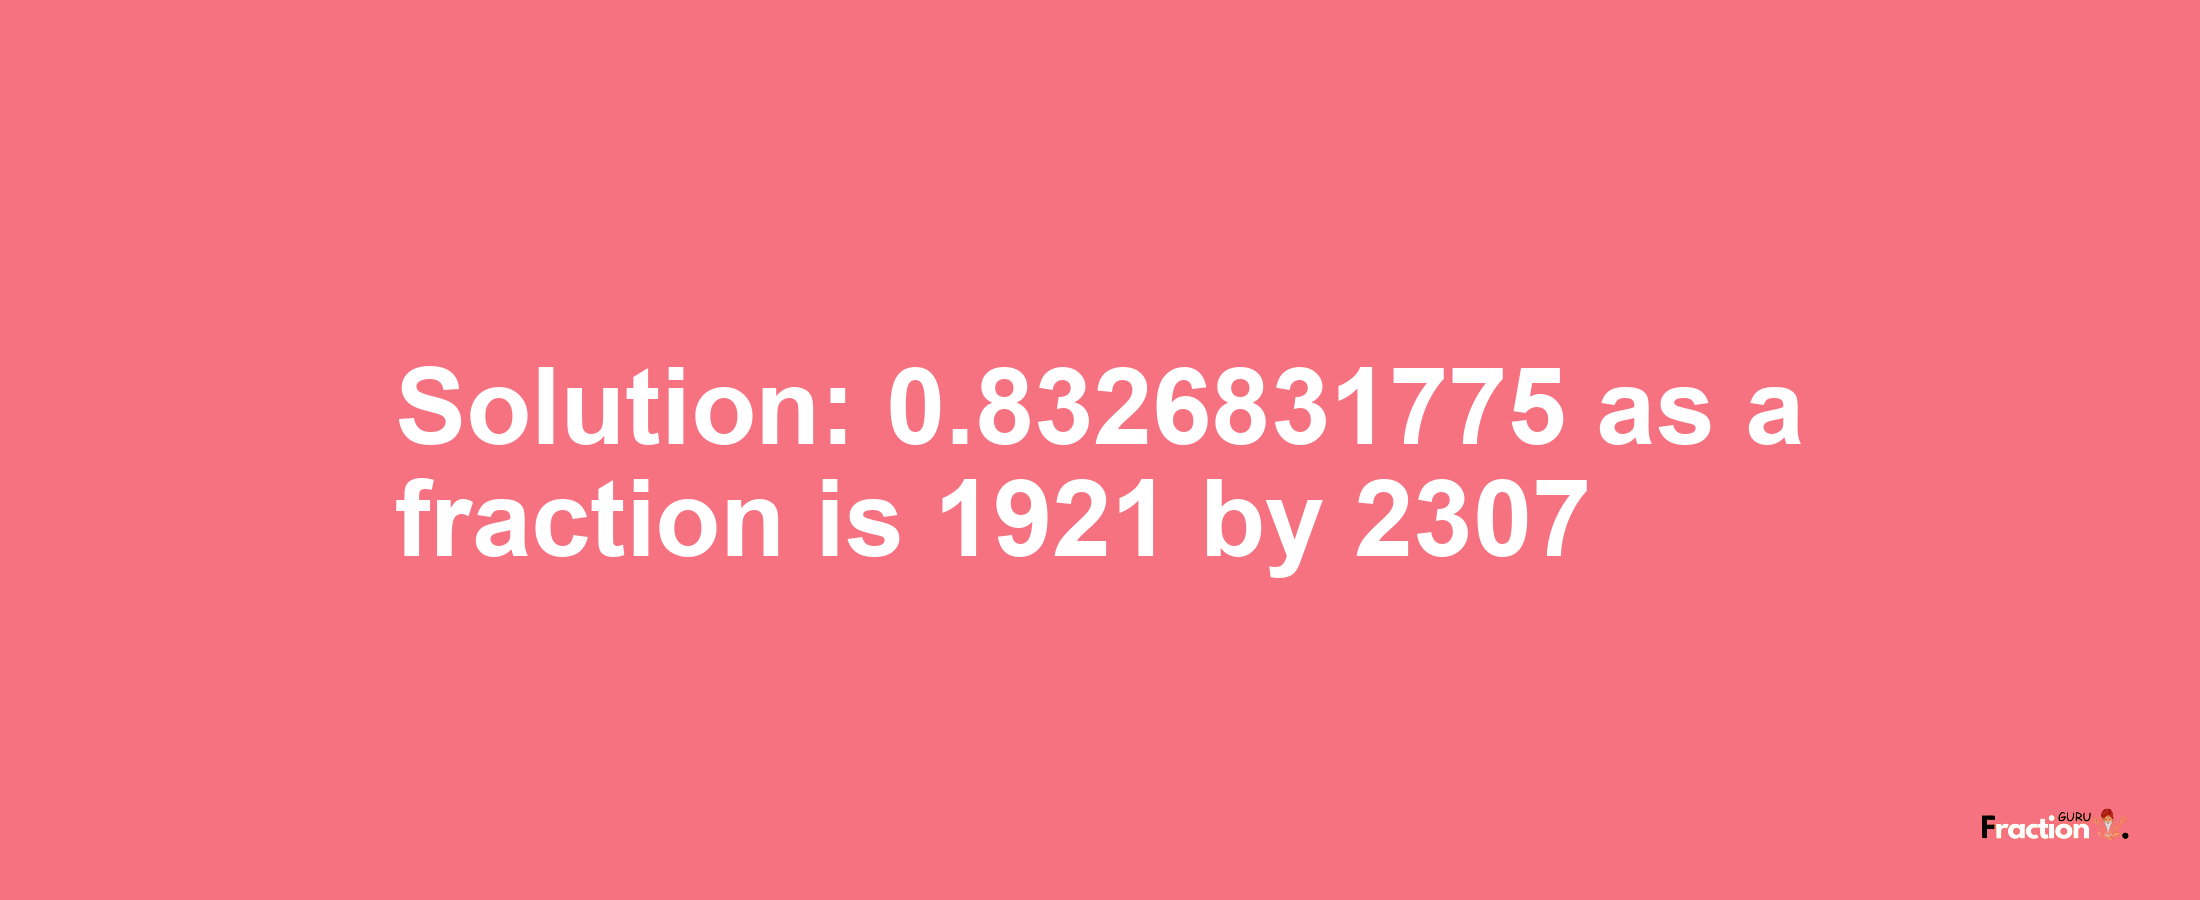 Solution:0.8326831775 as a fraction is 1921/2307